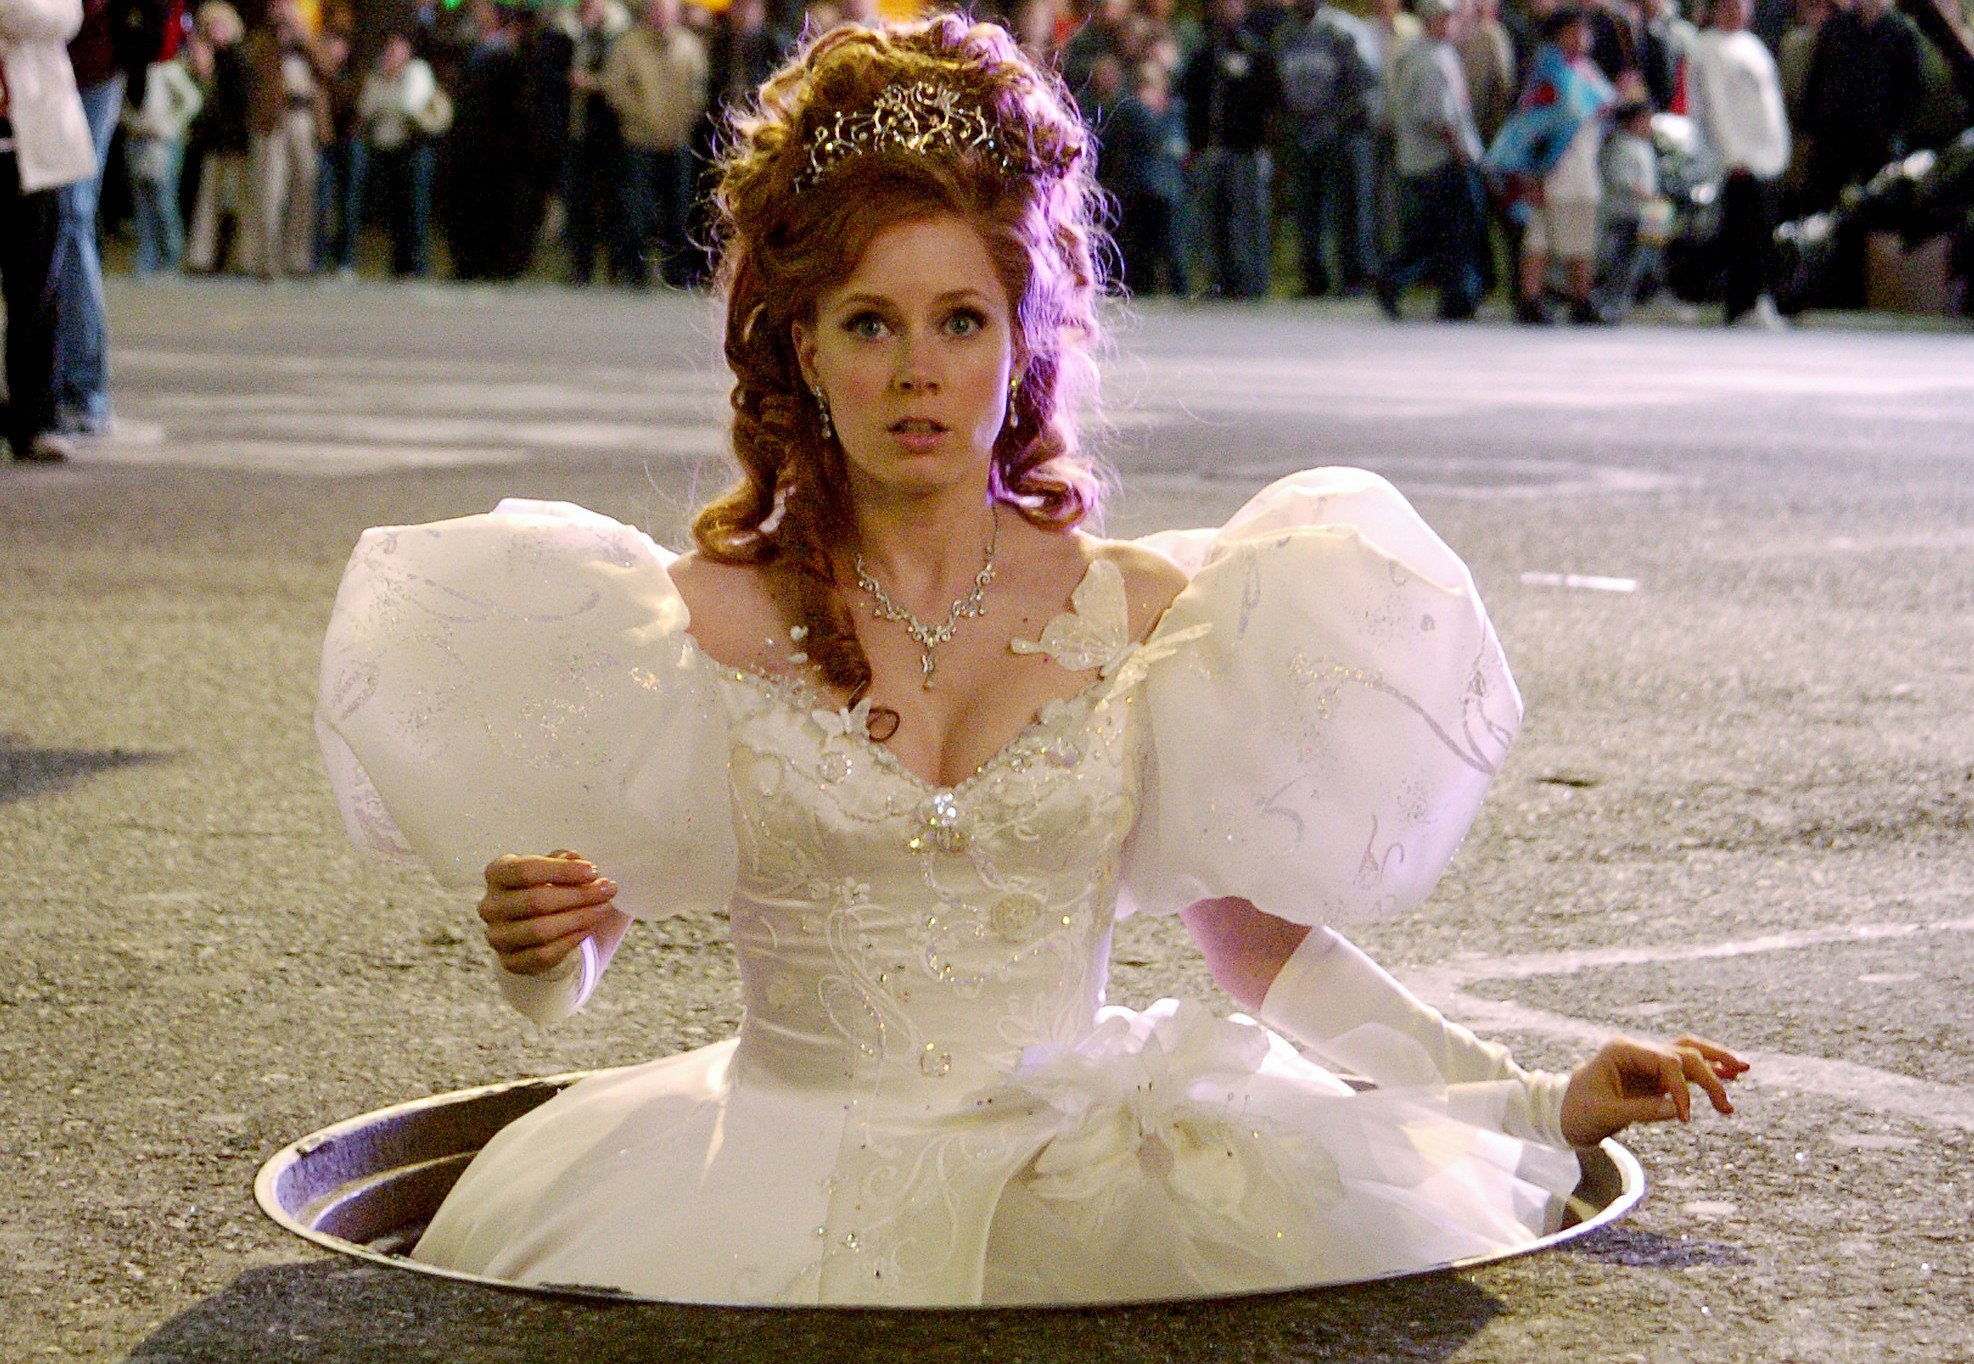 Amy Adams emerges from Times Square in the Patrick Dempsey Disney movie Enchanted